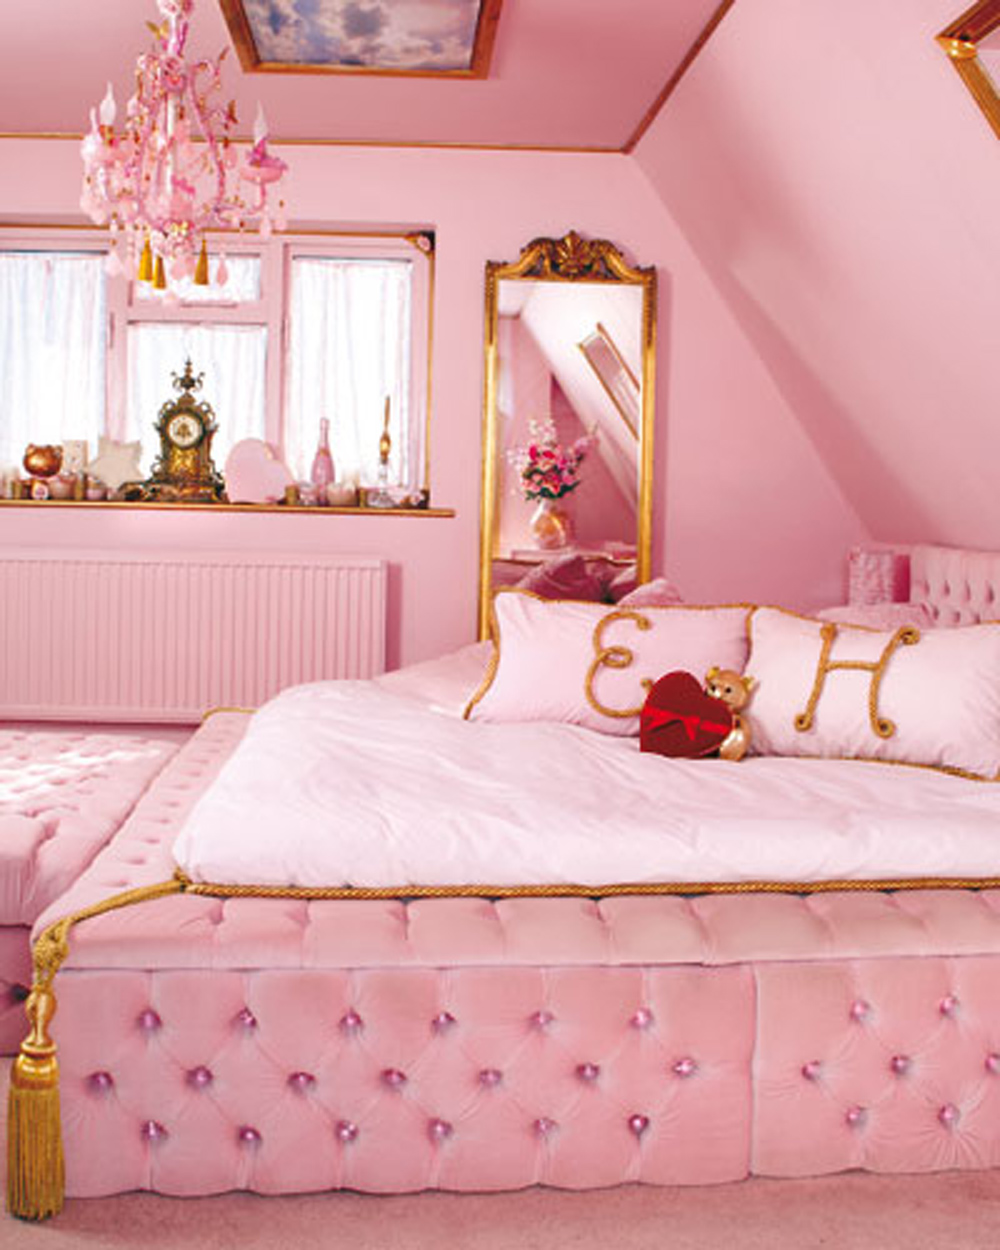 There's an entirely pink house on AirBnB in Essex, England